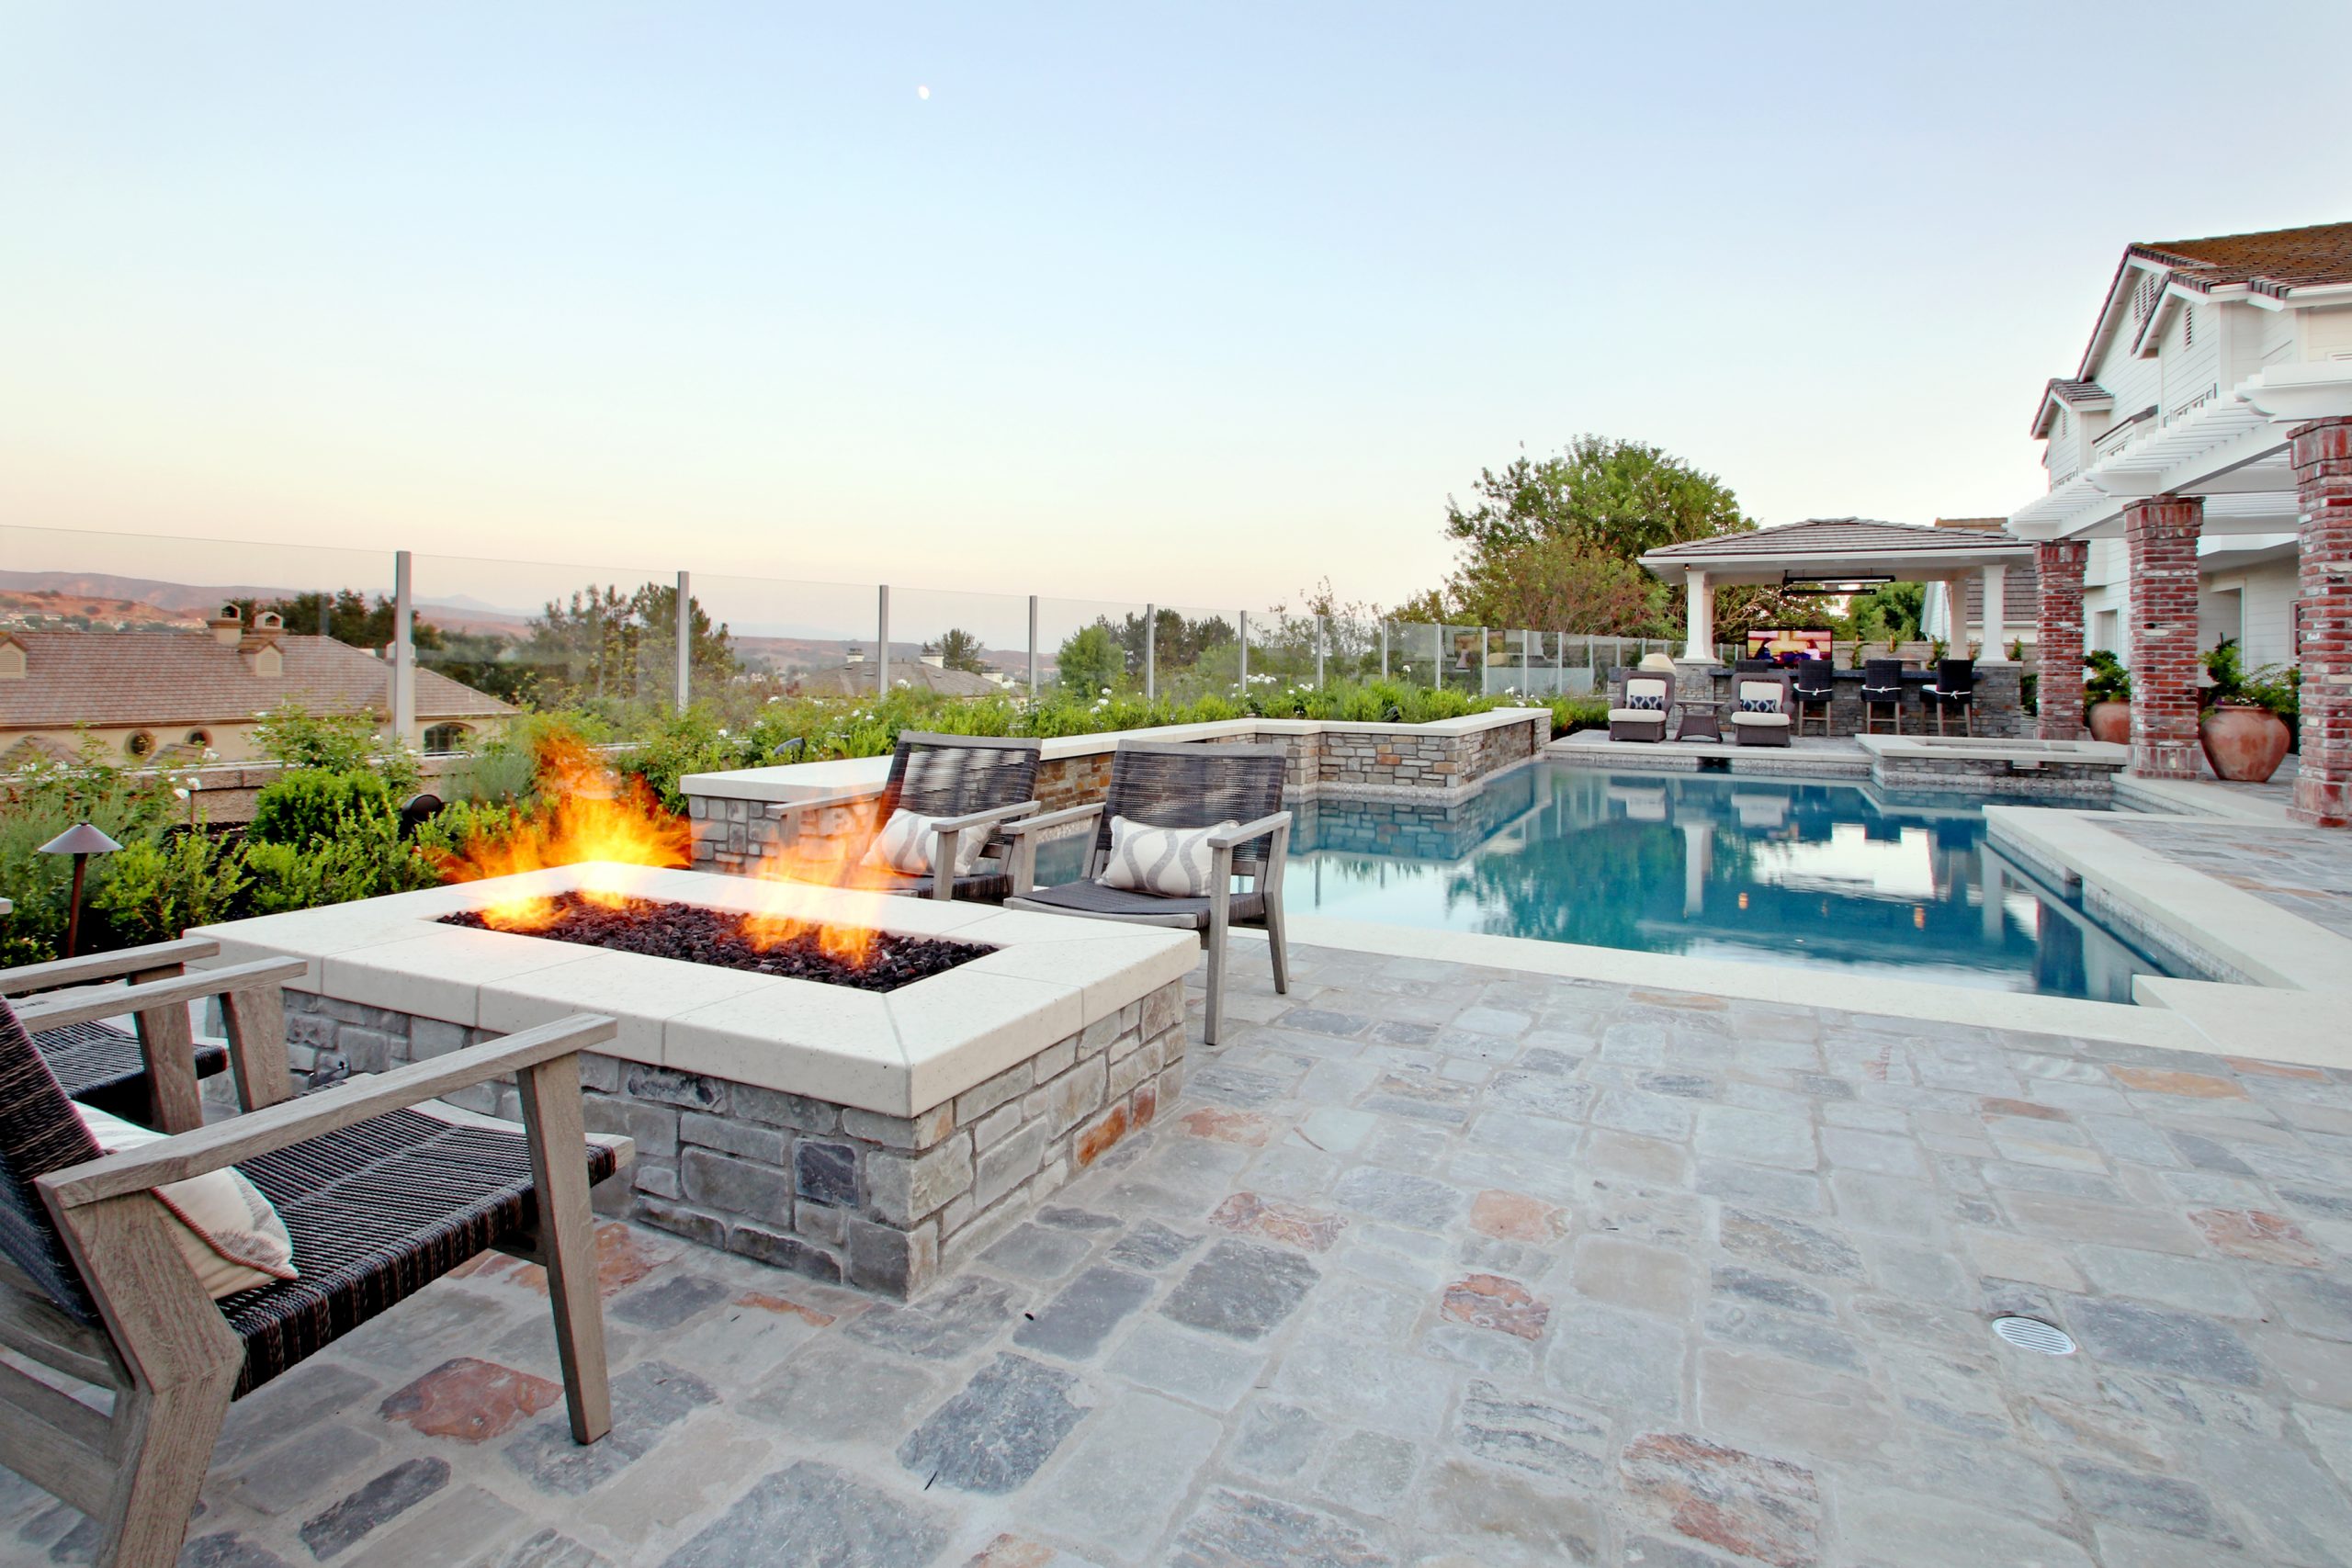 Spacious outdoor entertainment area, stone firepit, barbeque, Dreamscape by MGR leading pool contractor in Orange County